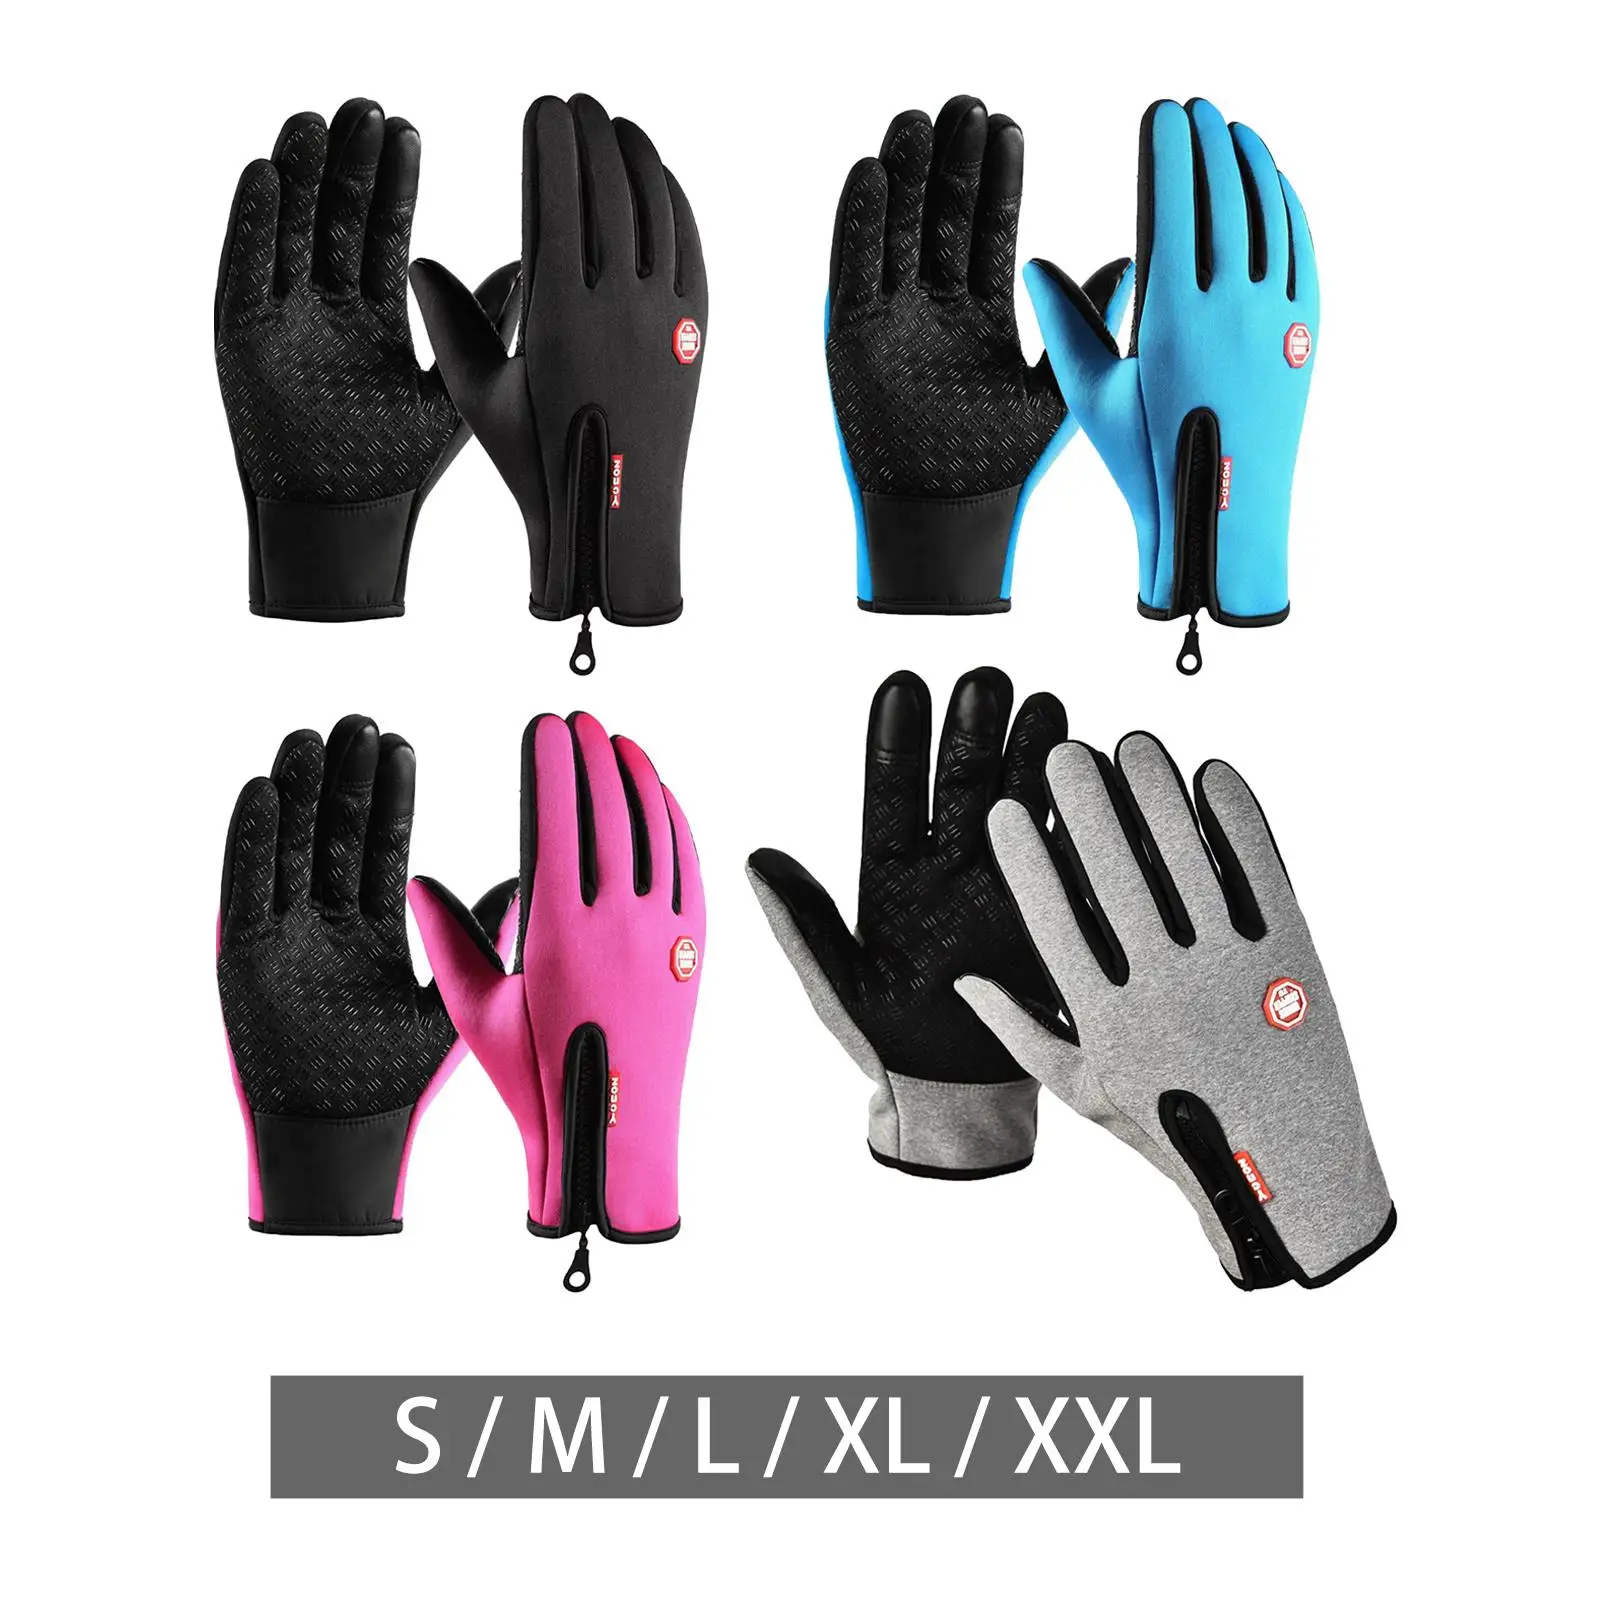 Winter Gloves Windproof Non Slip Waterproof Warm Insulated Thermal Touch Screen for Cycling Outdoor Sports Ski Men Women